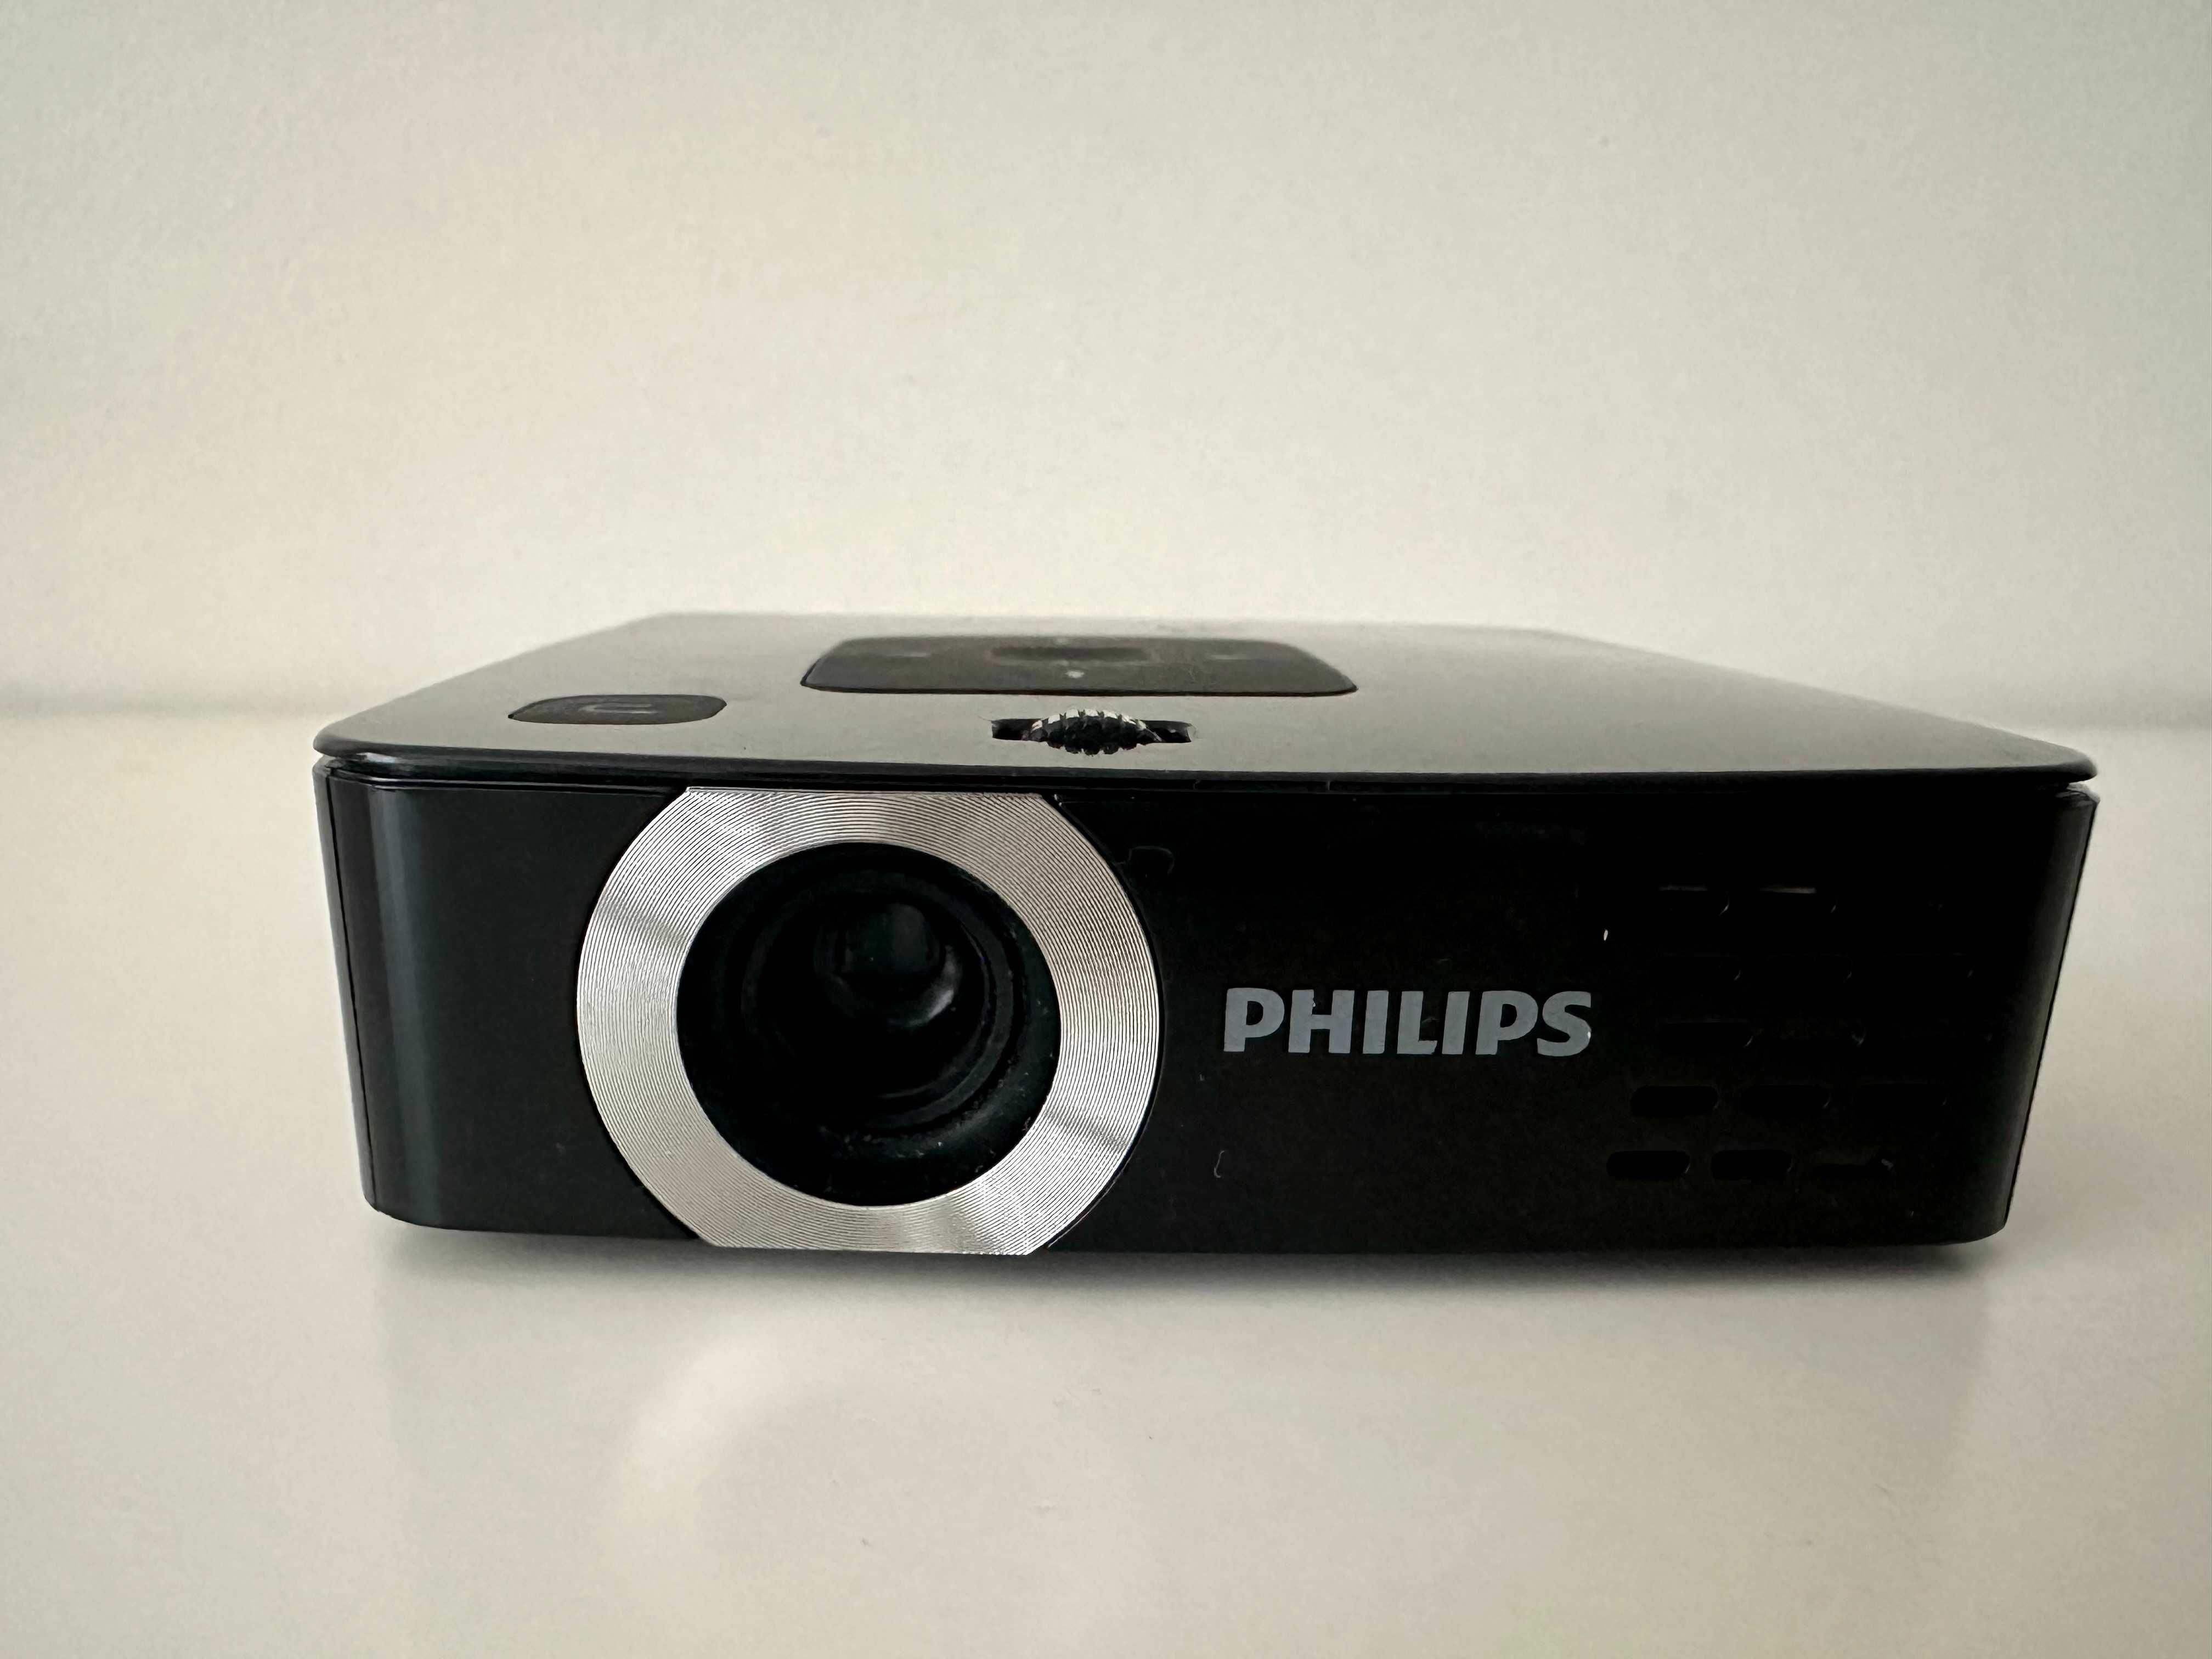 Philips Pocket Projector with mp4 player / Projector de bolso Philips